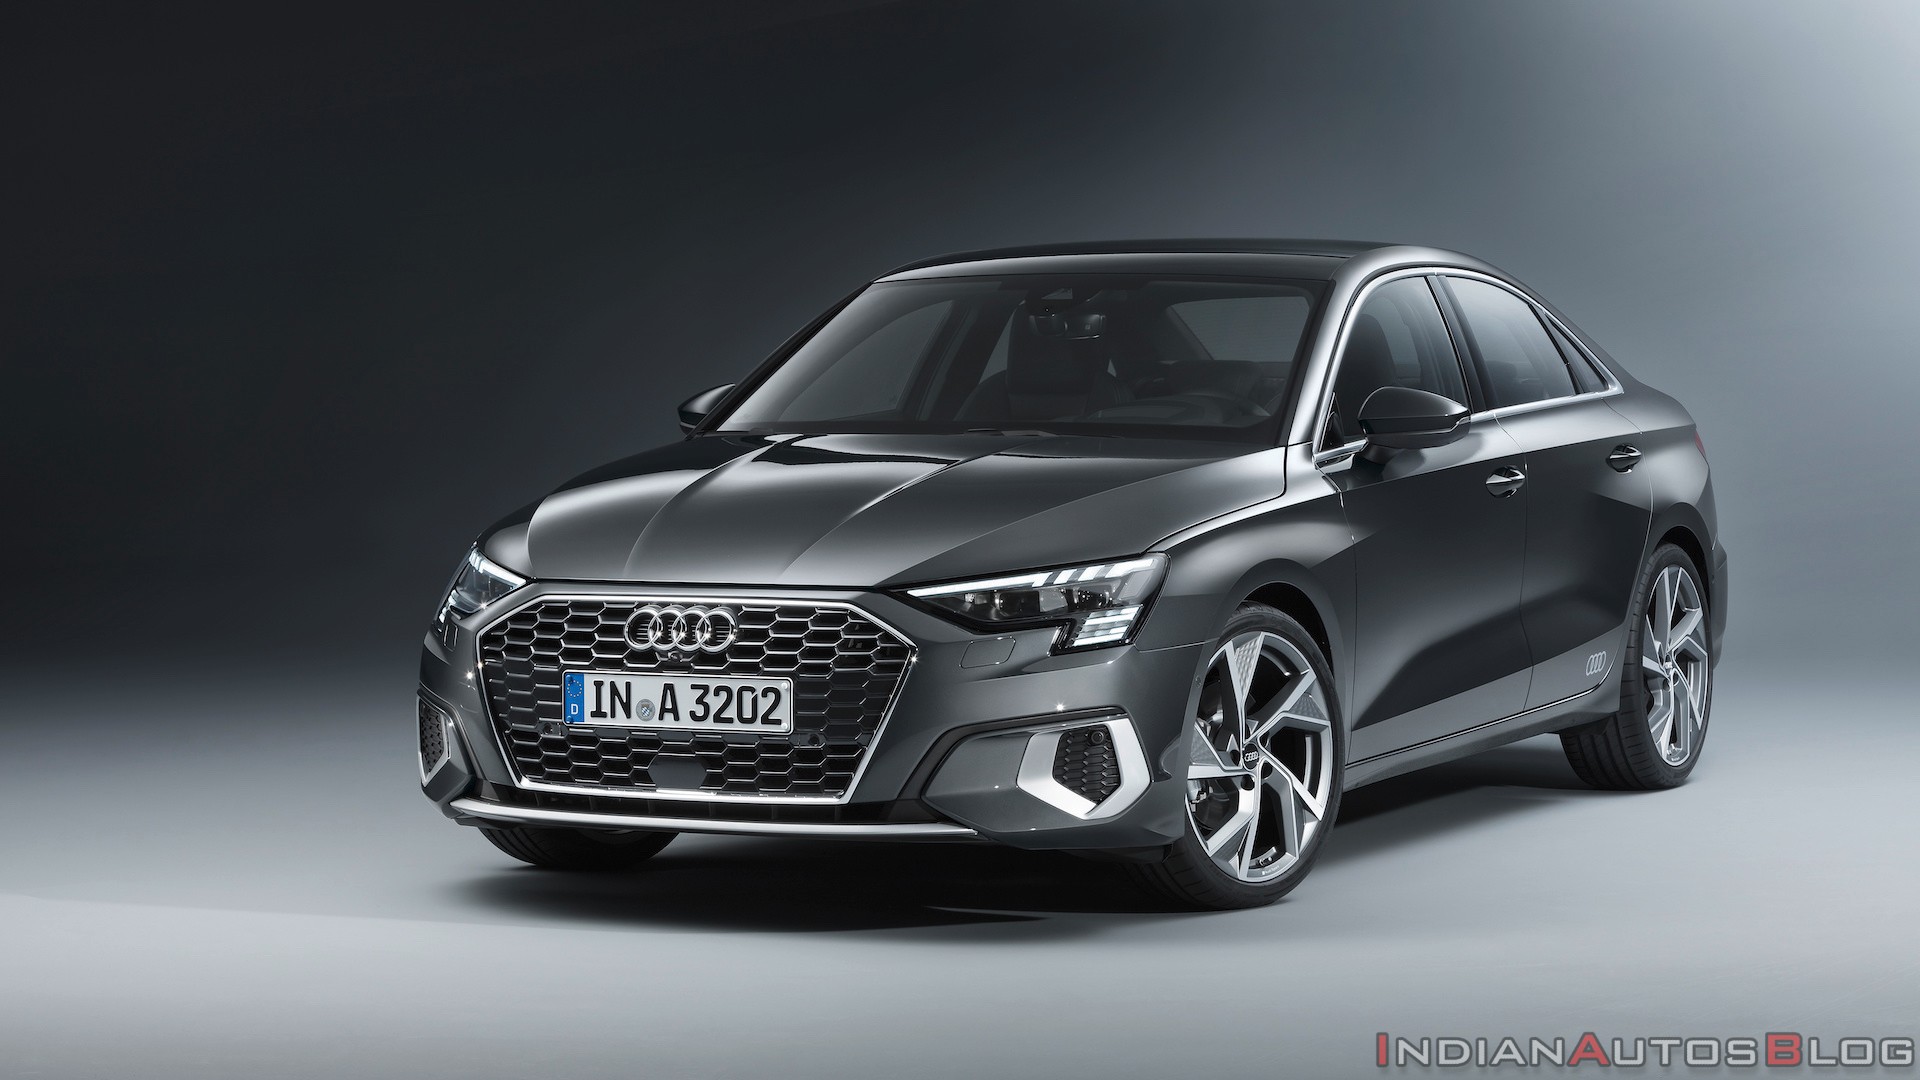 2021 Audi A3 Sedan breaks cover, priced from INR 25 lakh ...